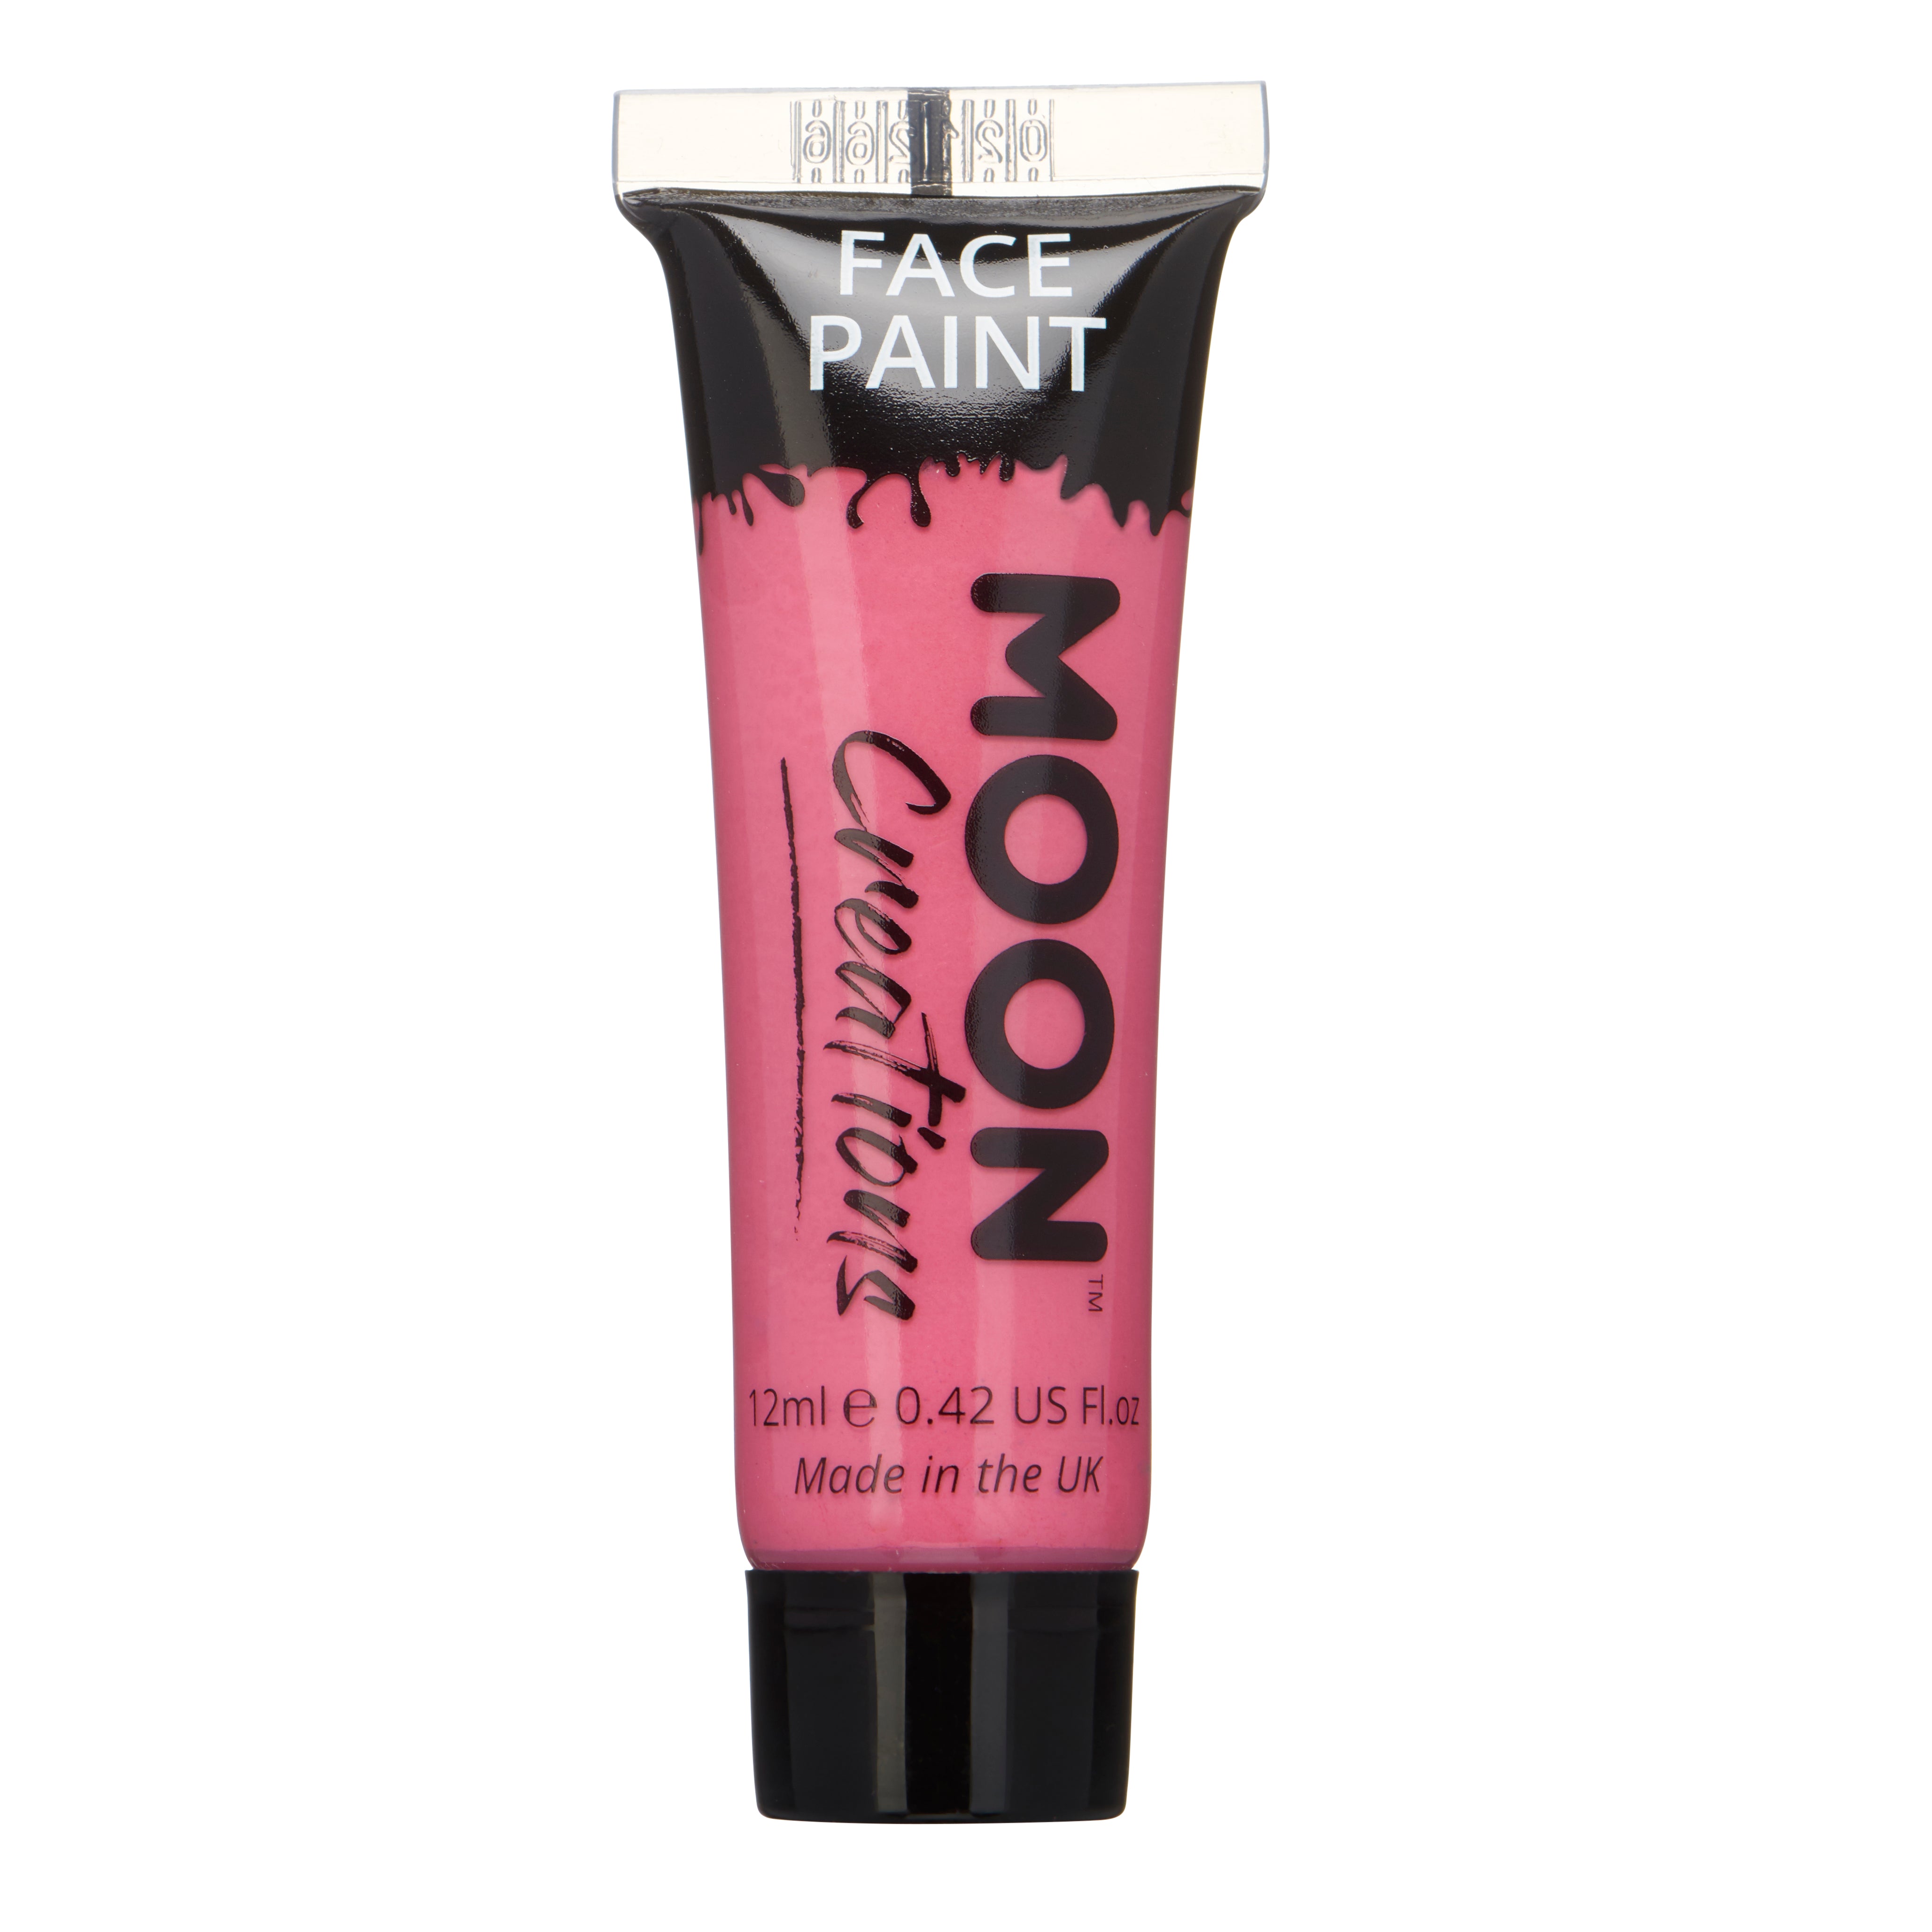 Bright Pink - Face & Body Paint Makeup, 12mL. Cosmetically certified, FDA & Health Canada compliant, cruelty free and vegan.